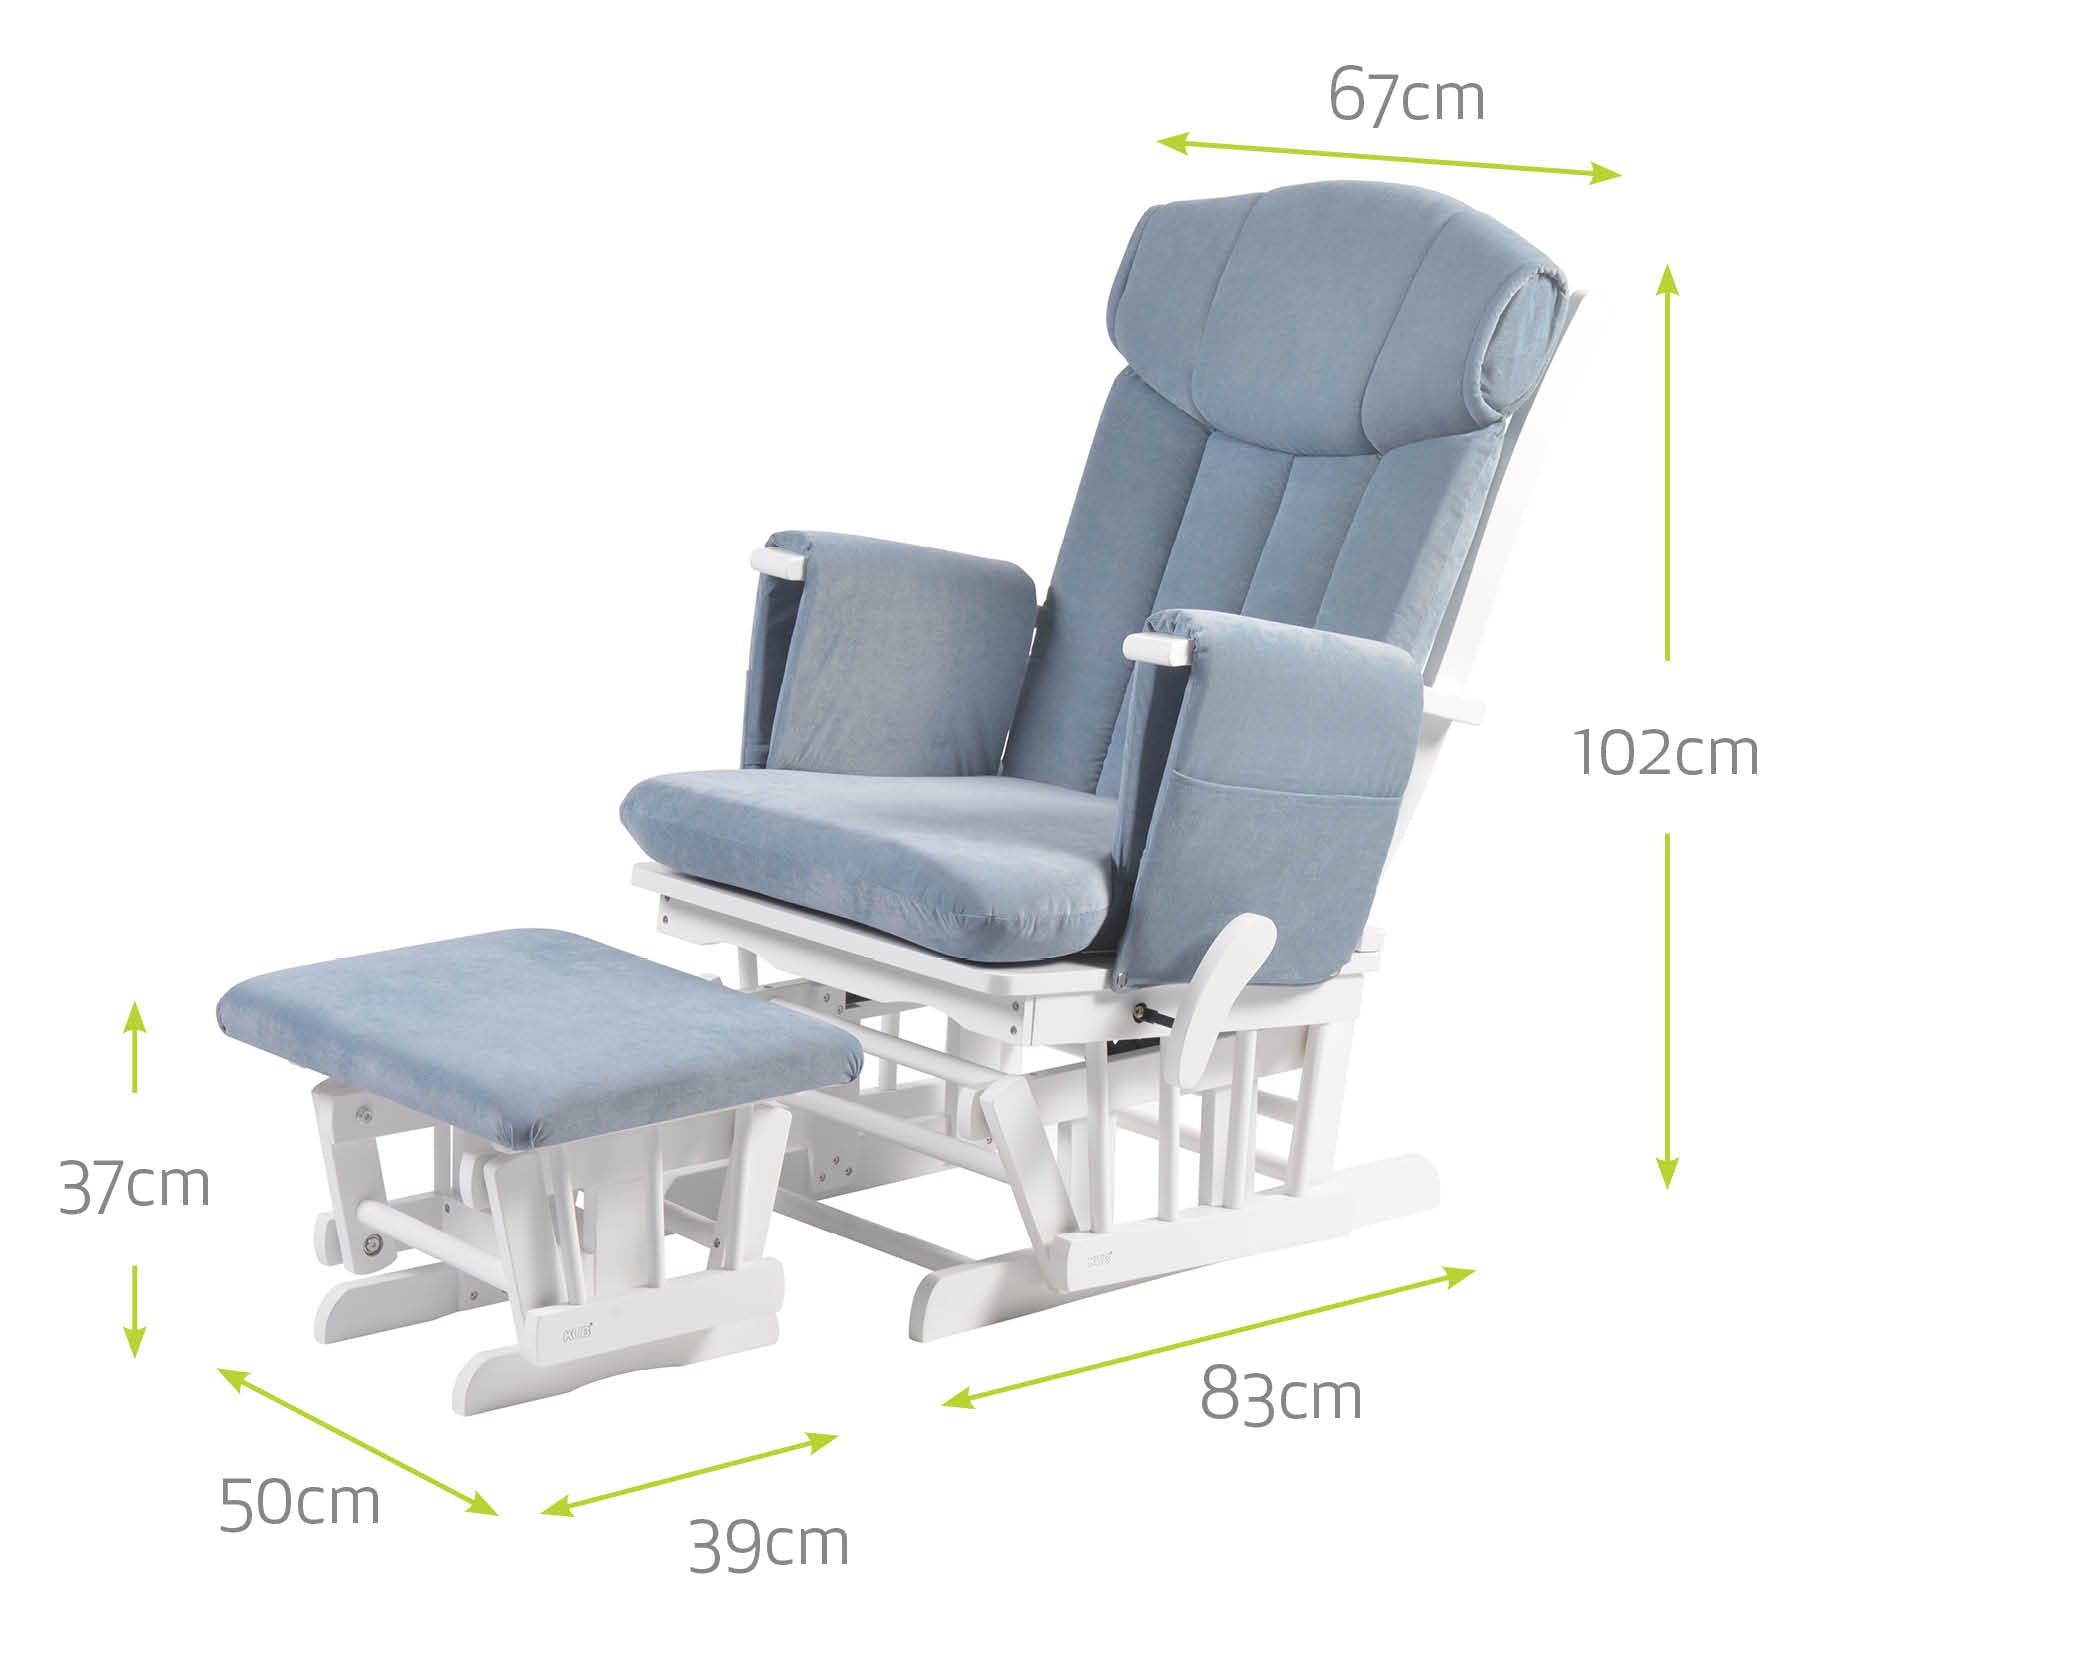 Chatsworth Nursing Chair and Footstool Grey Grade A